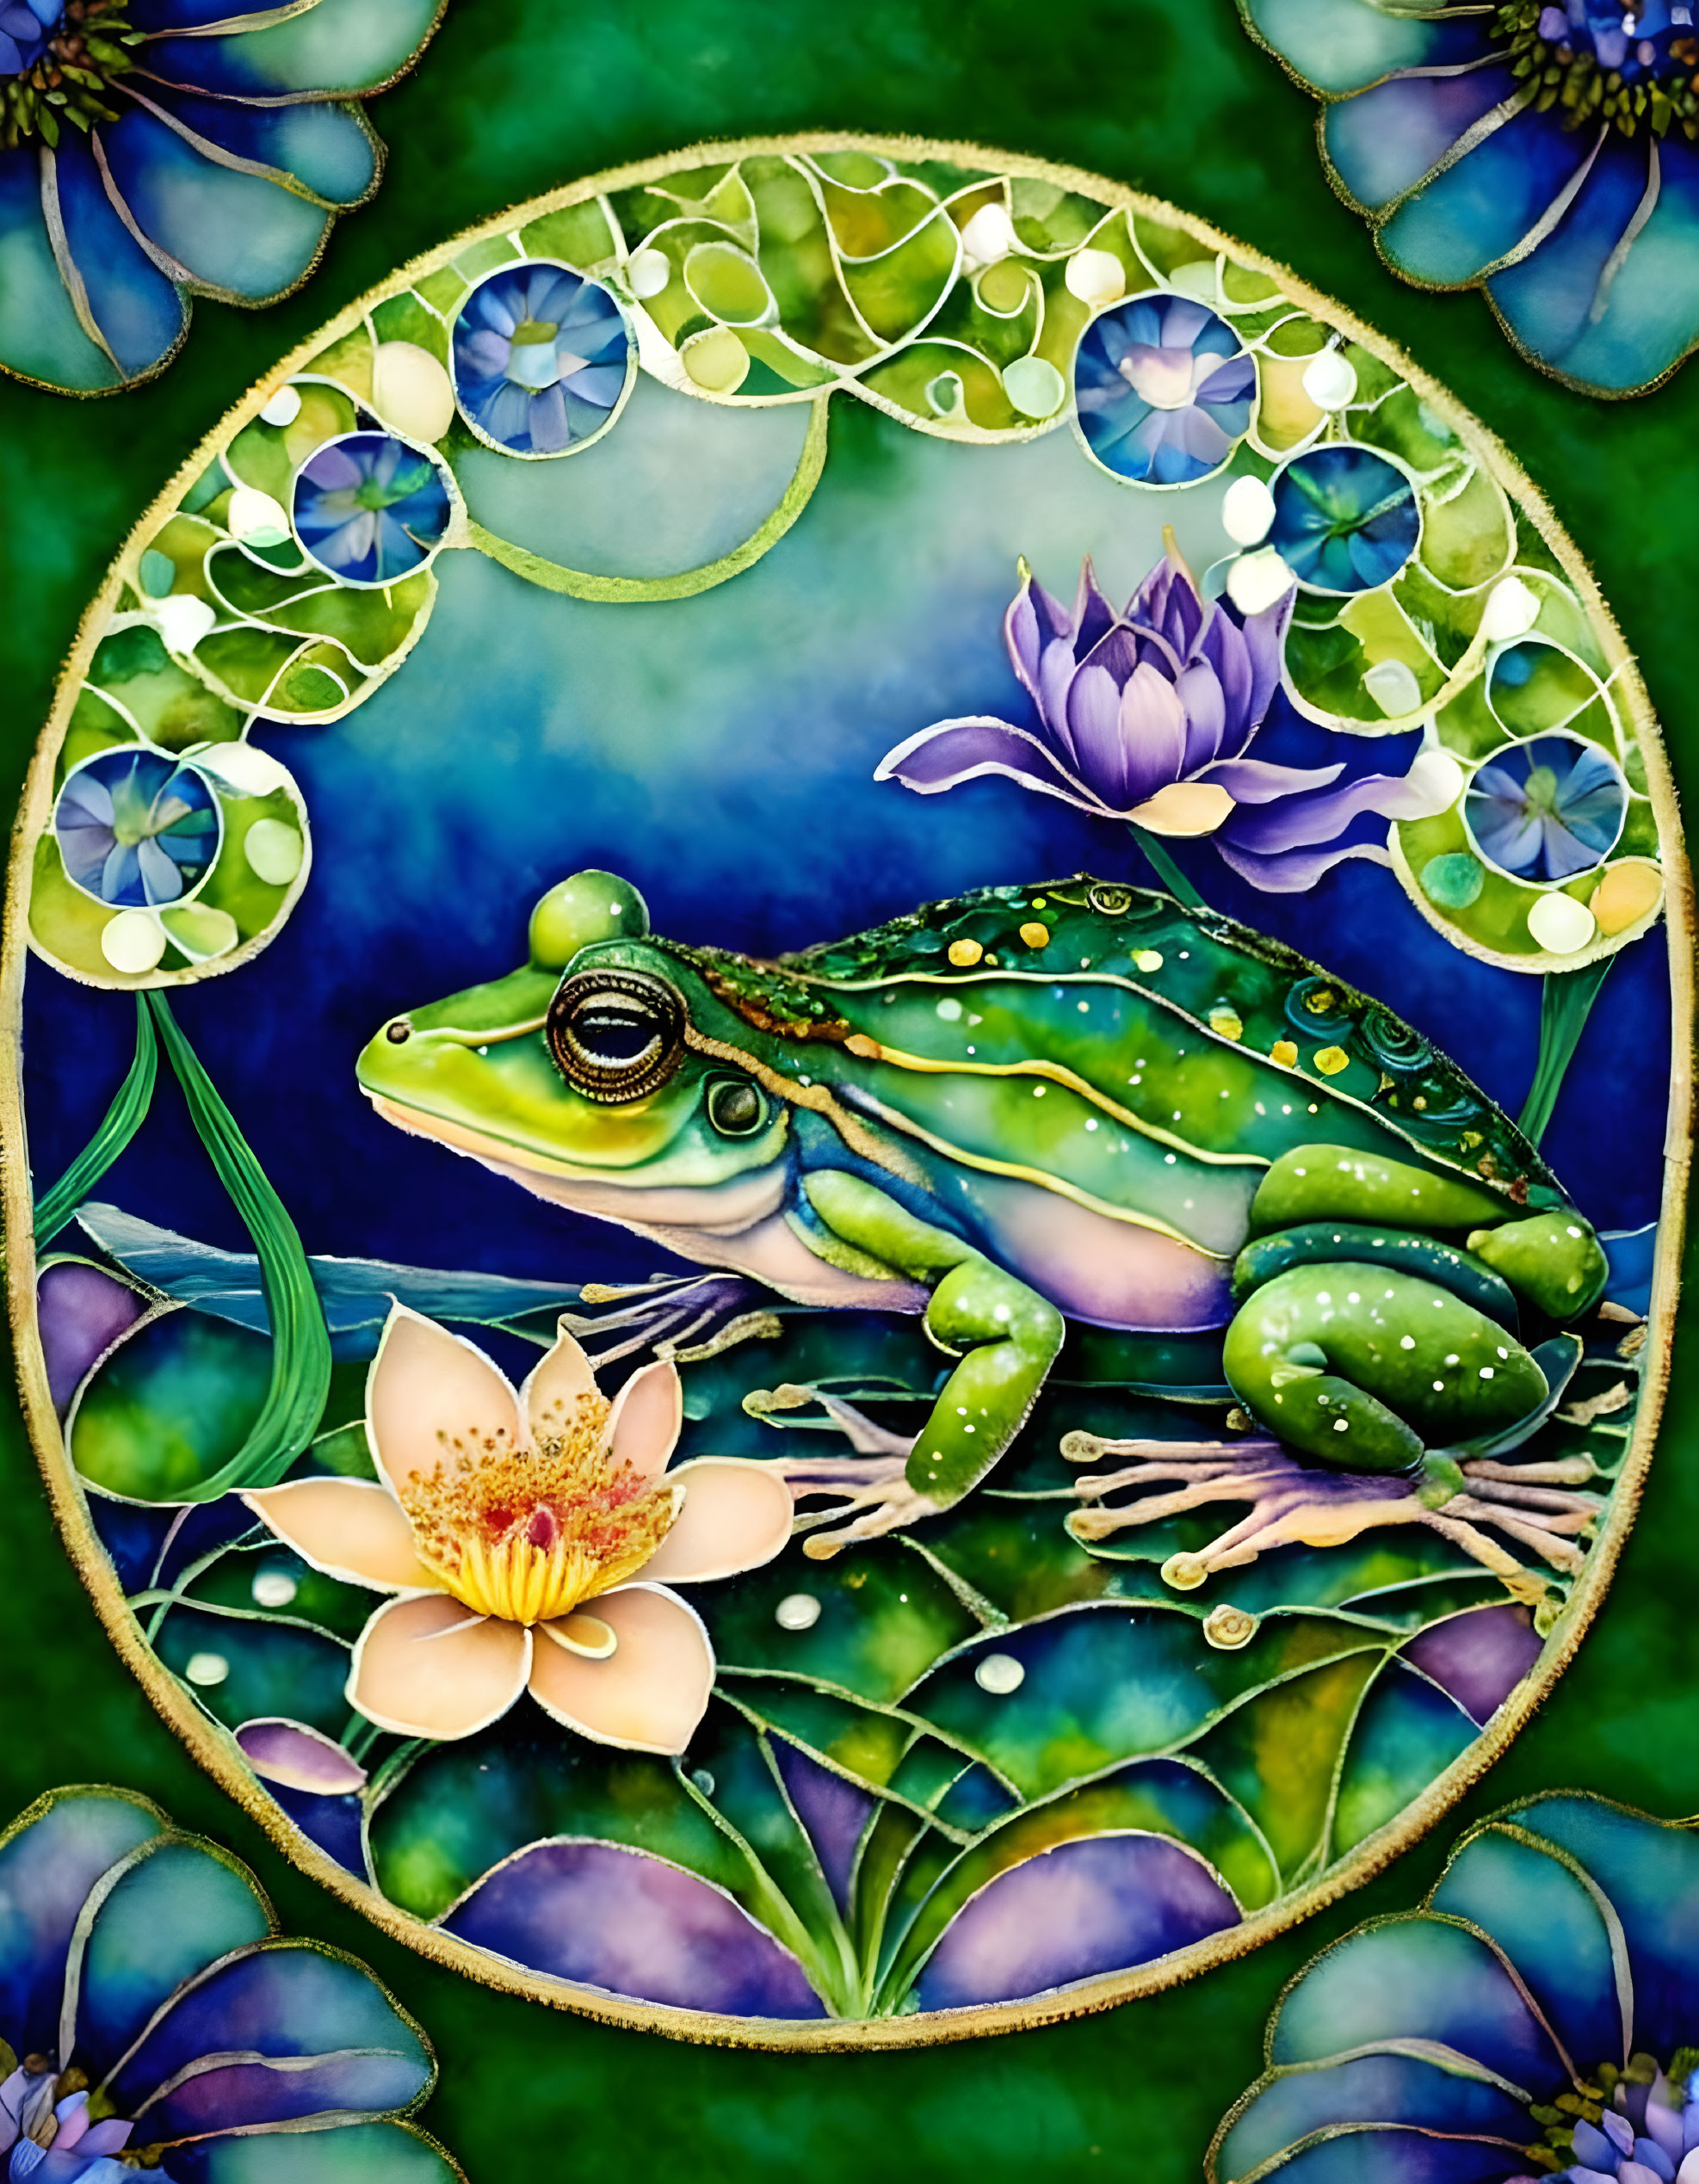 Colorful Green Frog Illustration Among Lily Pads and Flowers